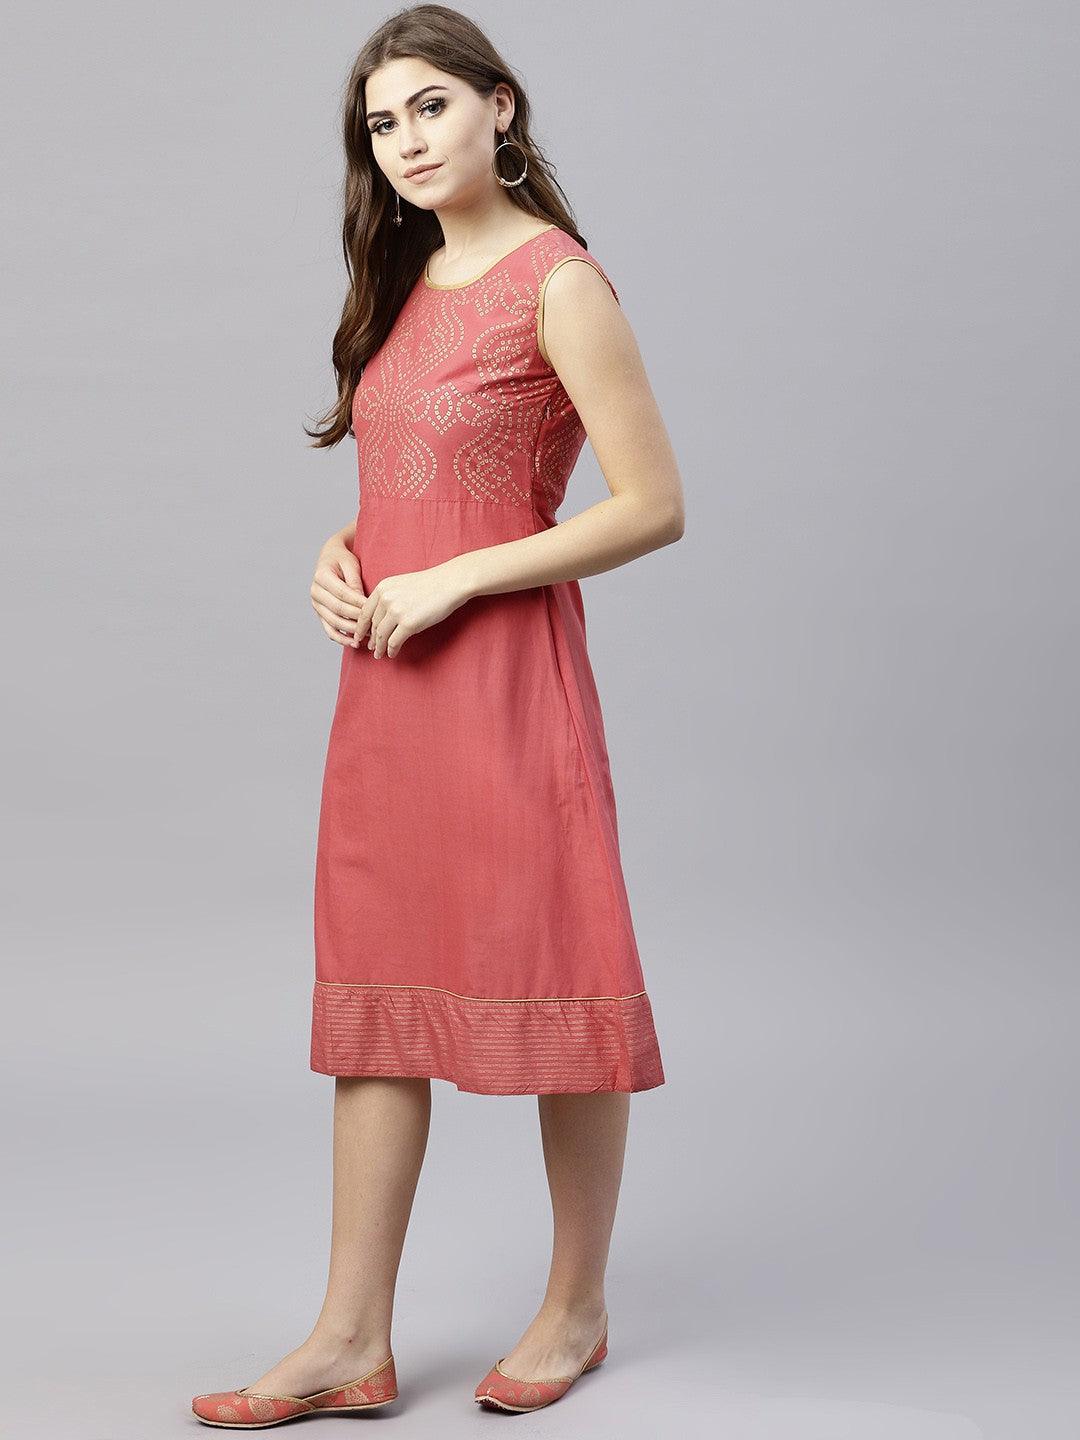 Peach Gold Printed Sleevless A-Line Dress (Fully Stitched) - Znxclothing